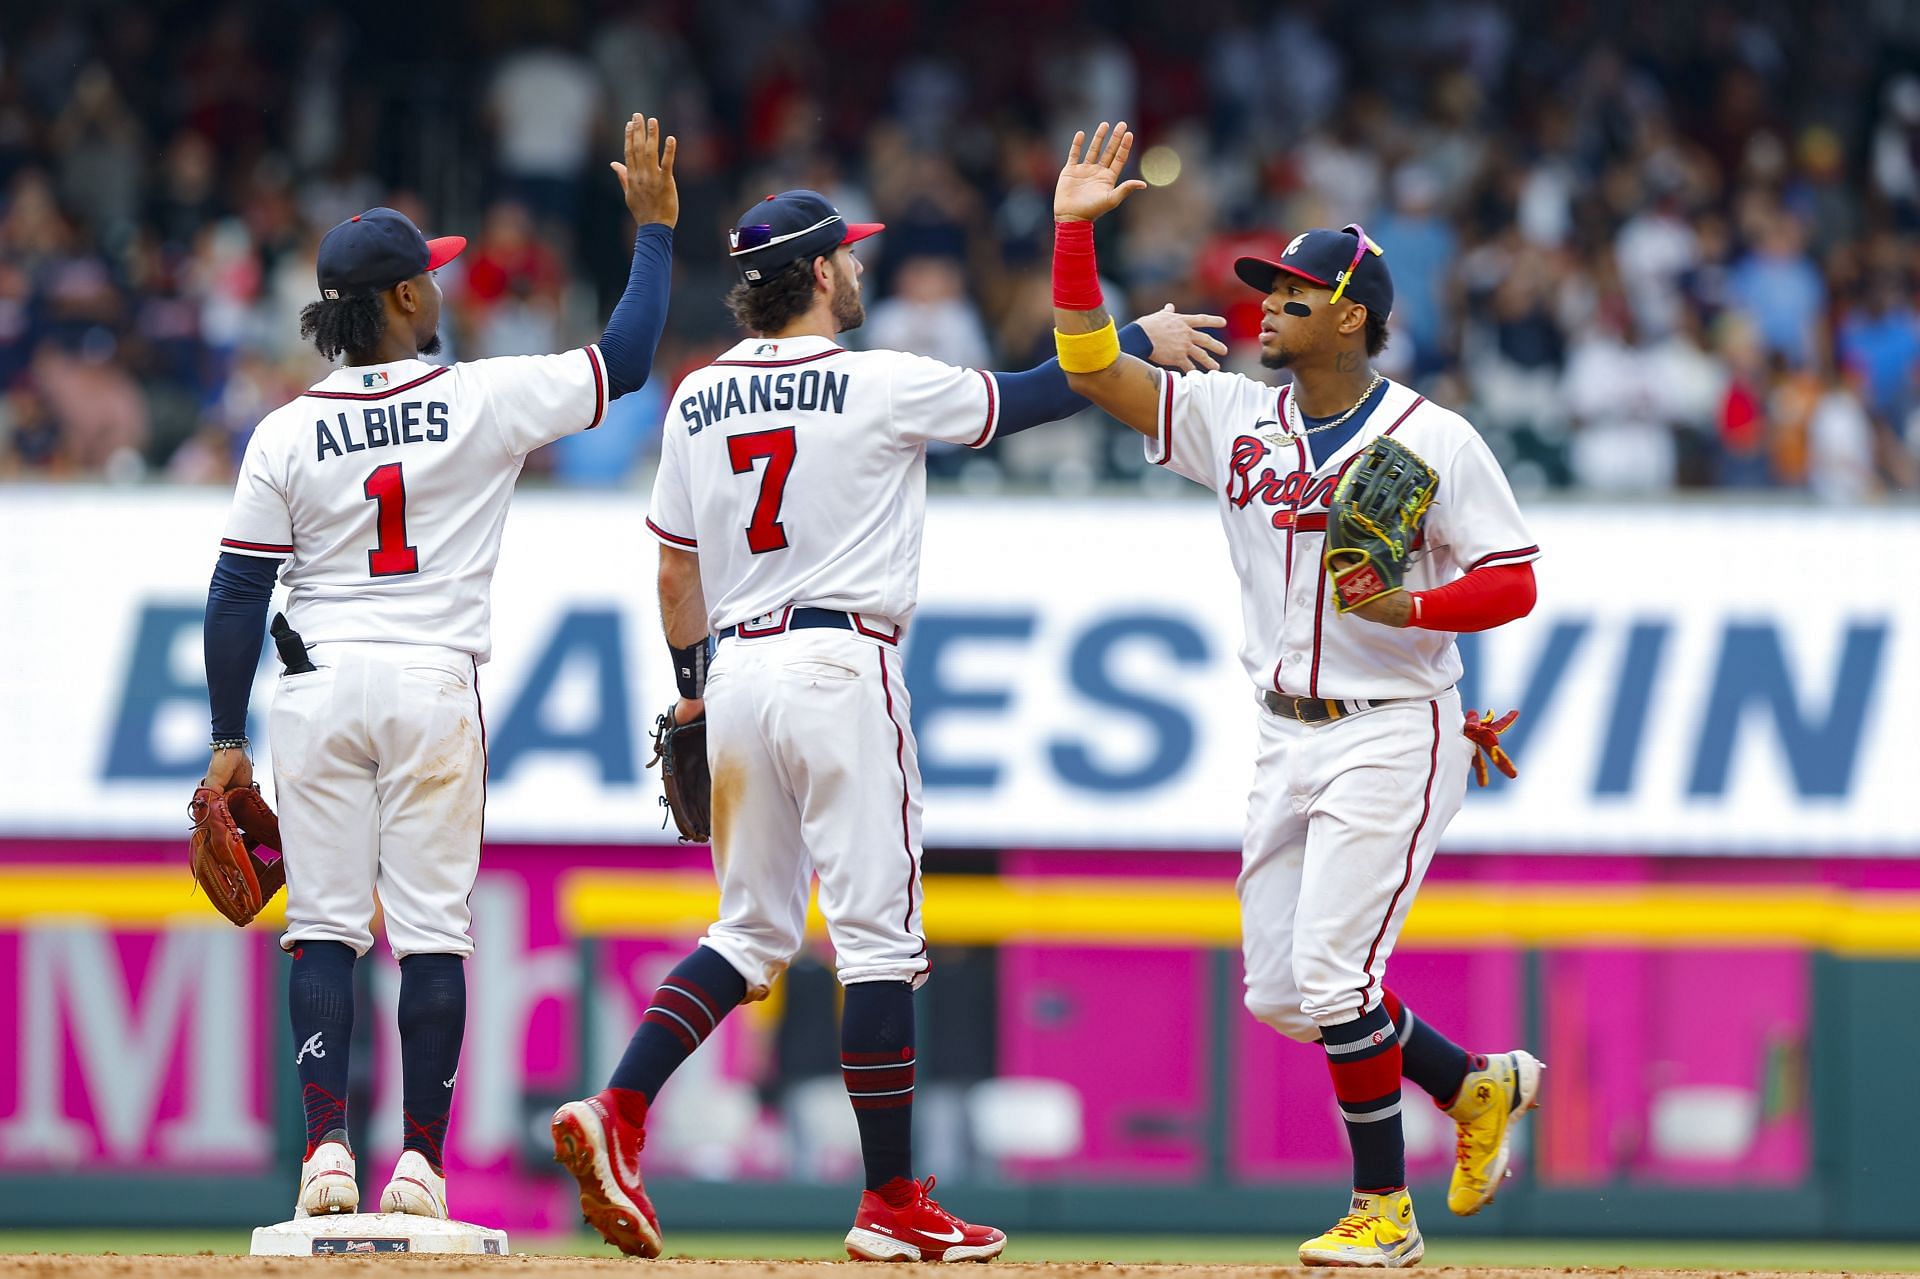  Atlanta Braves congratulate each other after a victory over the Pittsburgh Pirates.